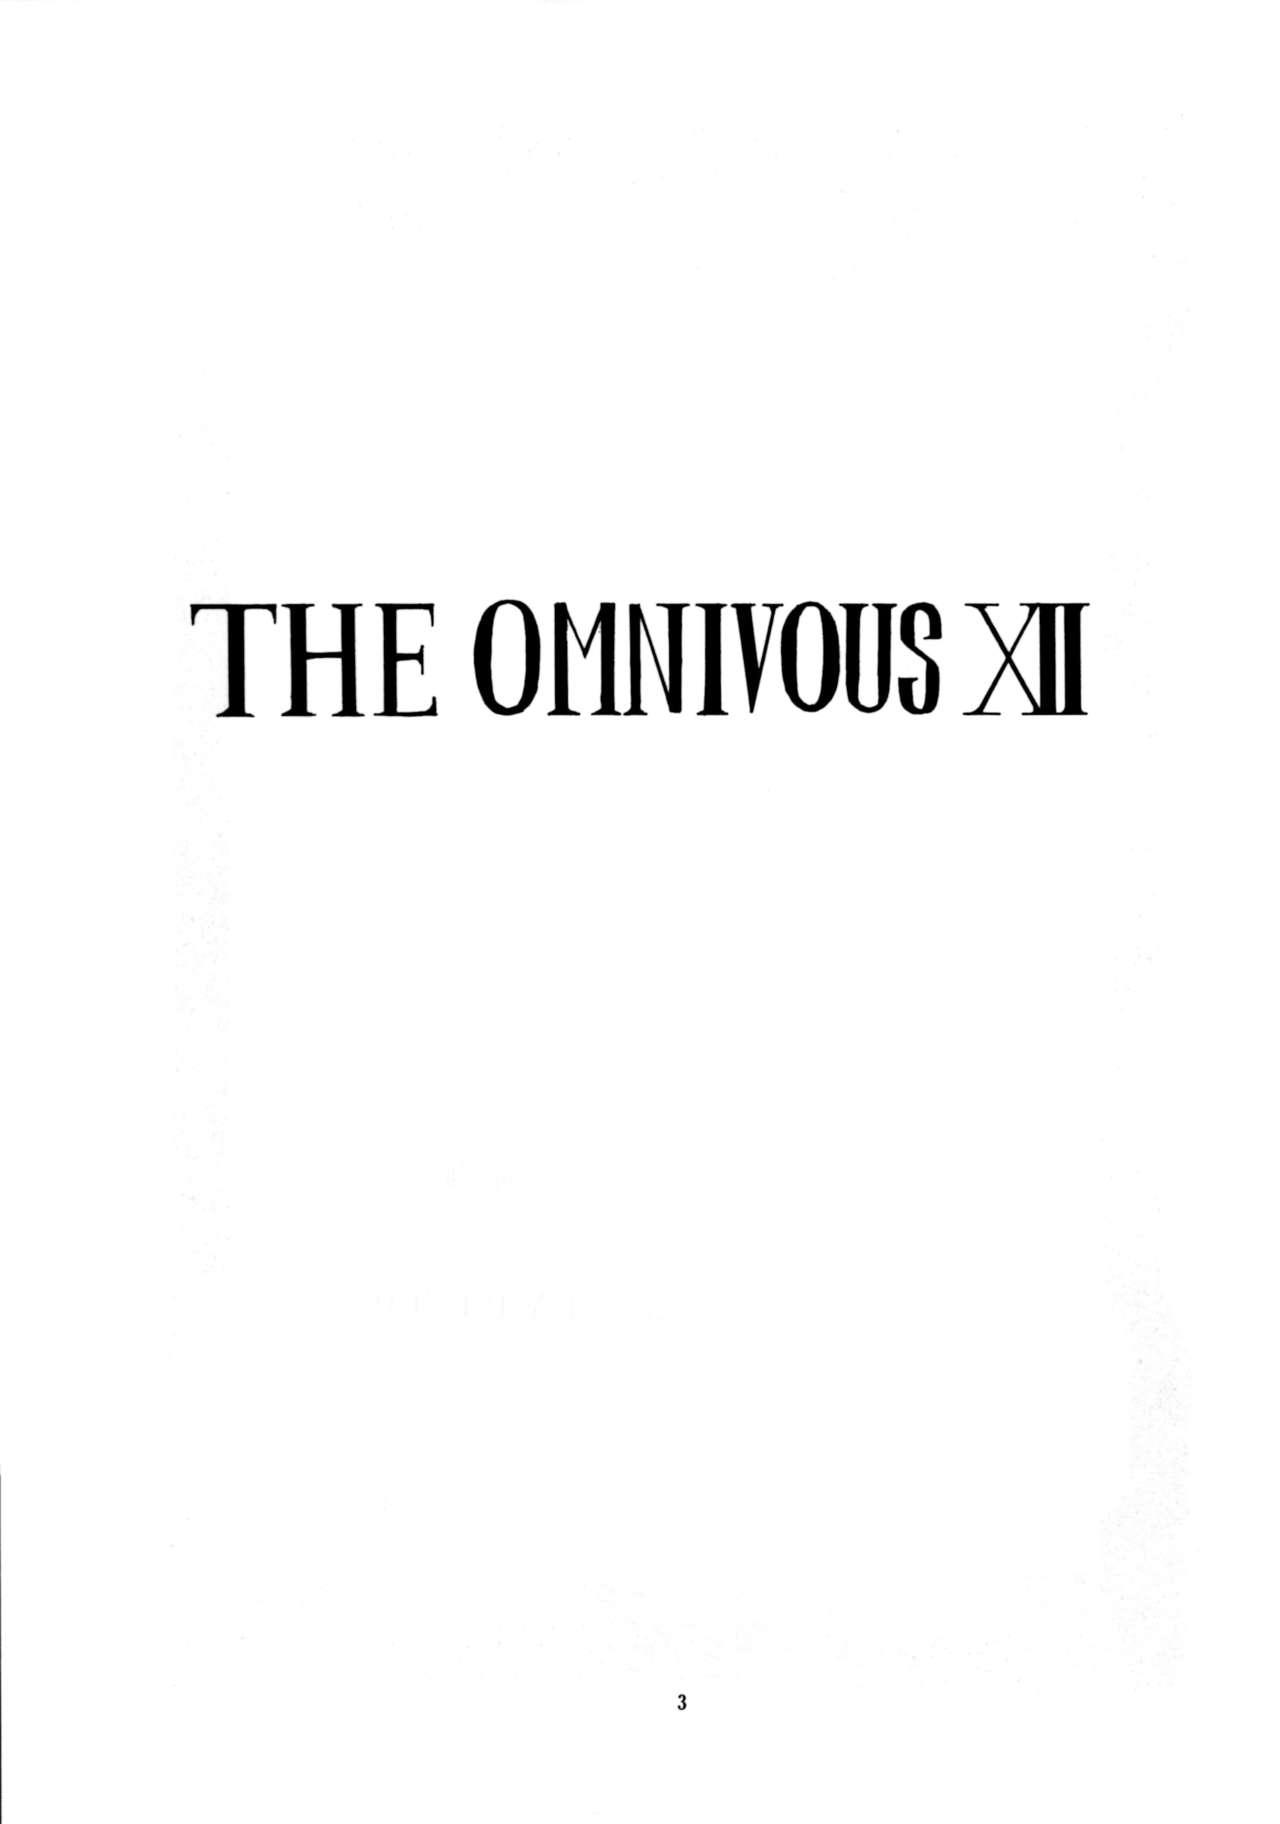 Hotfuck THE OMNIVOUS XII - Neon genesis evangelion Doggie Style Porn - Page 6